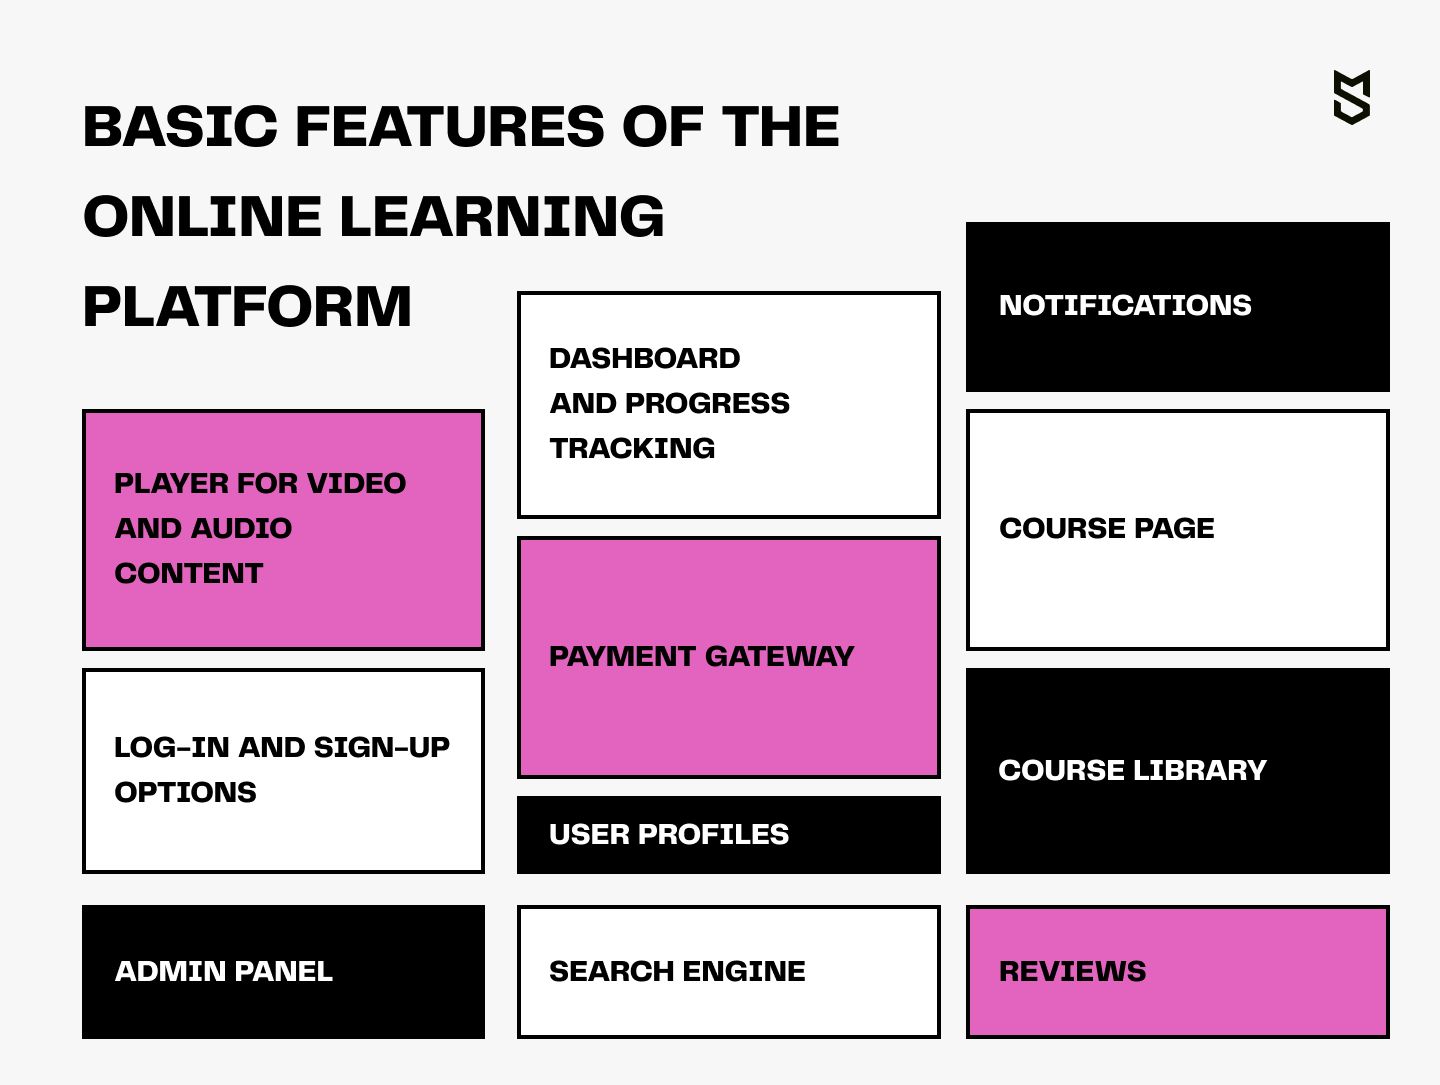 Basic features of the online learning platform